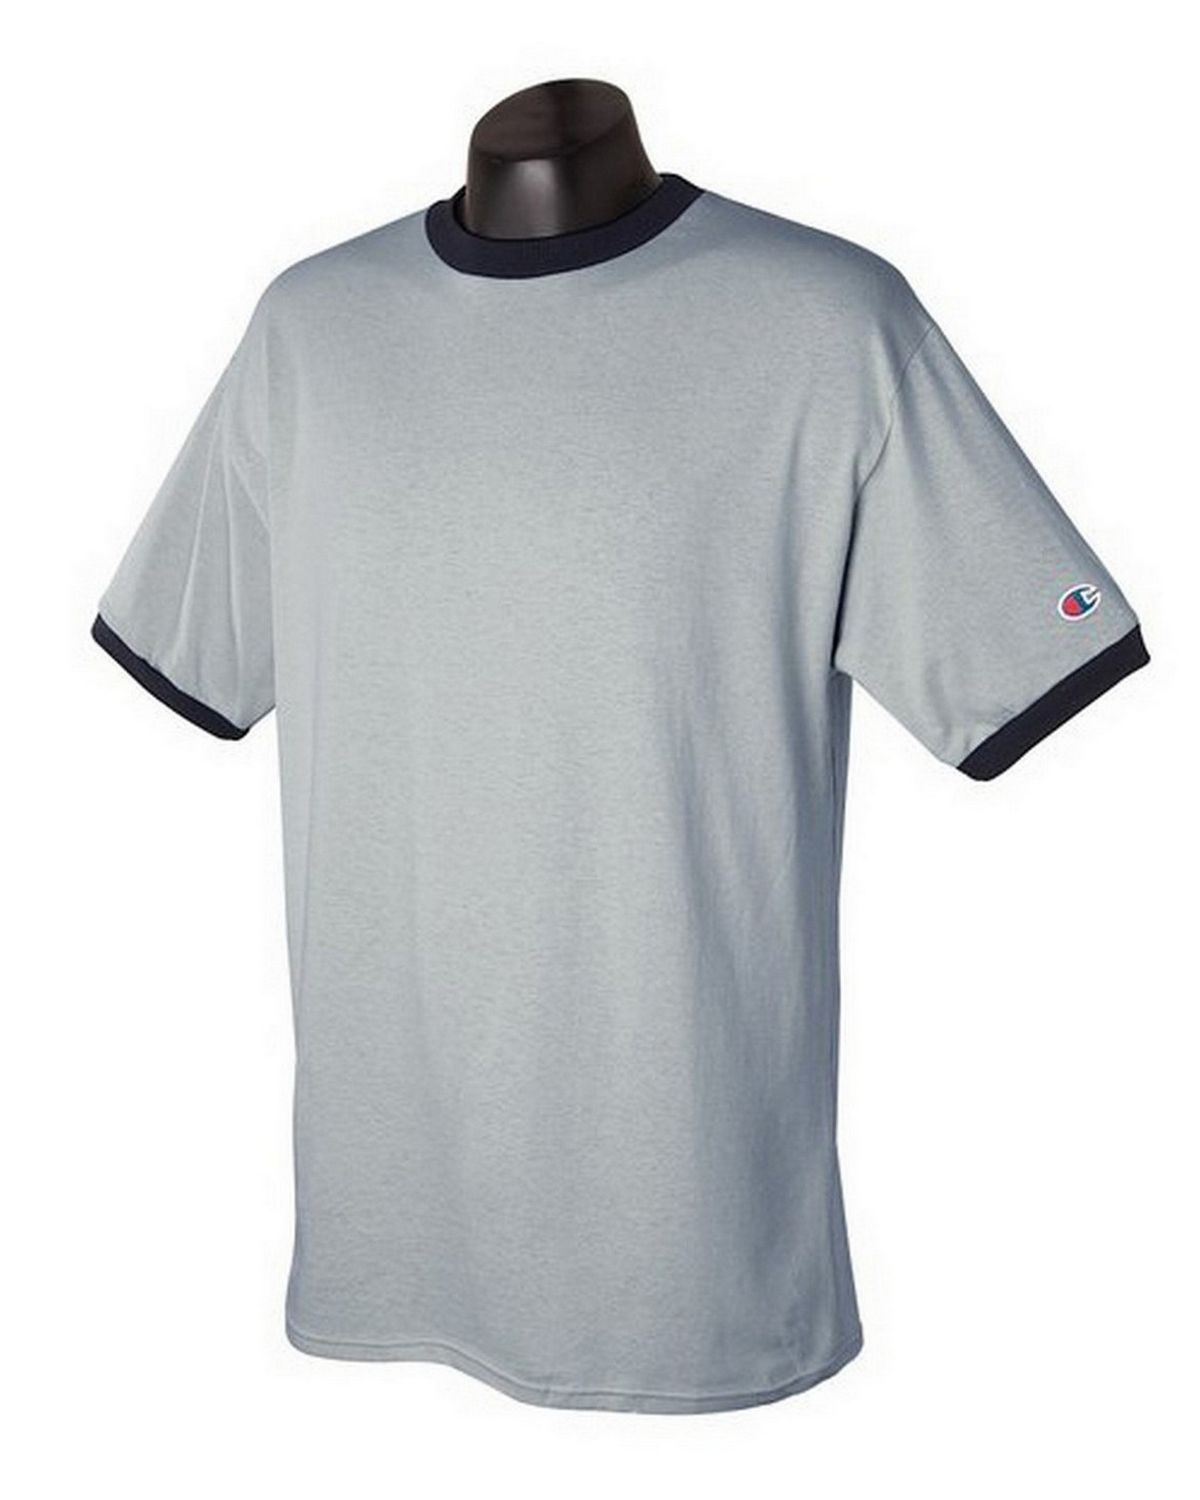 champion authentic athletic wear shirts